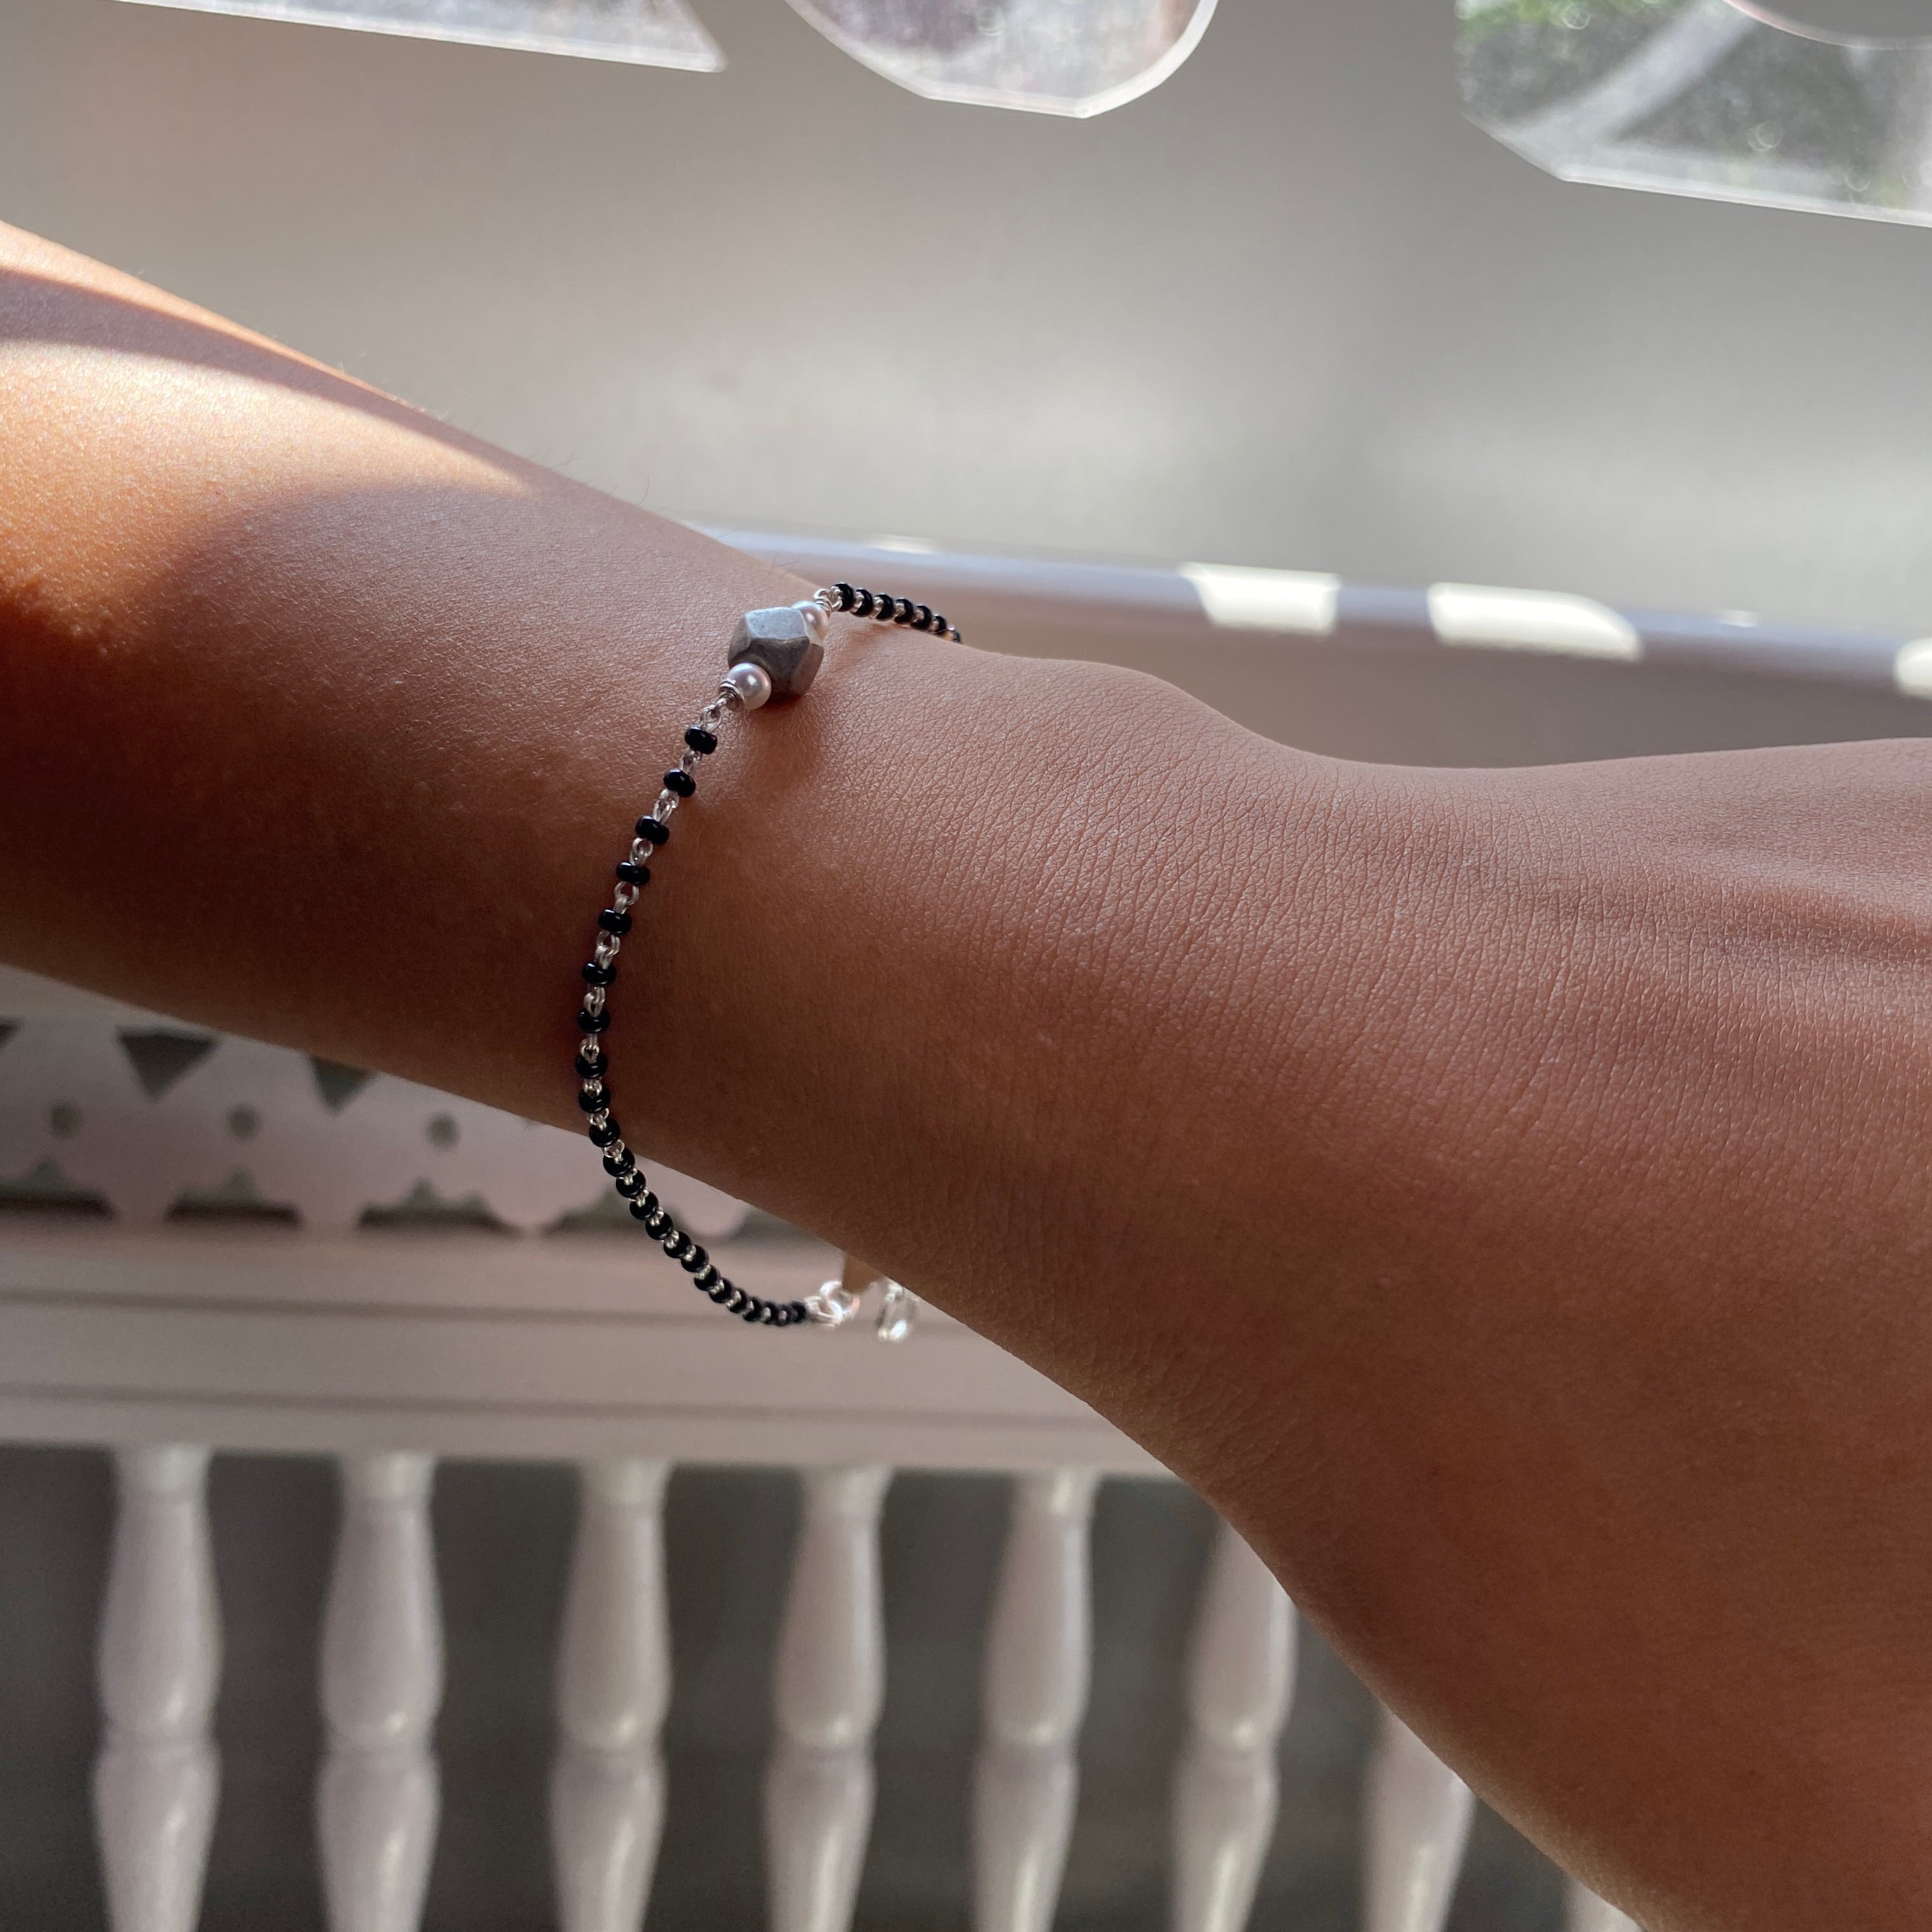 a woman's arm with a beaded bracelet on it